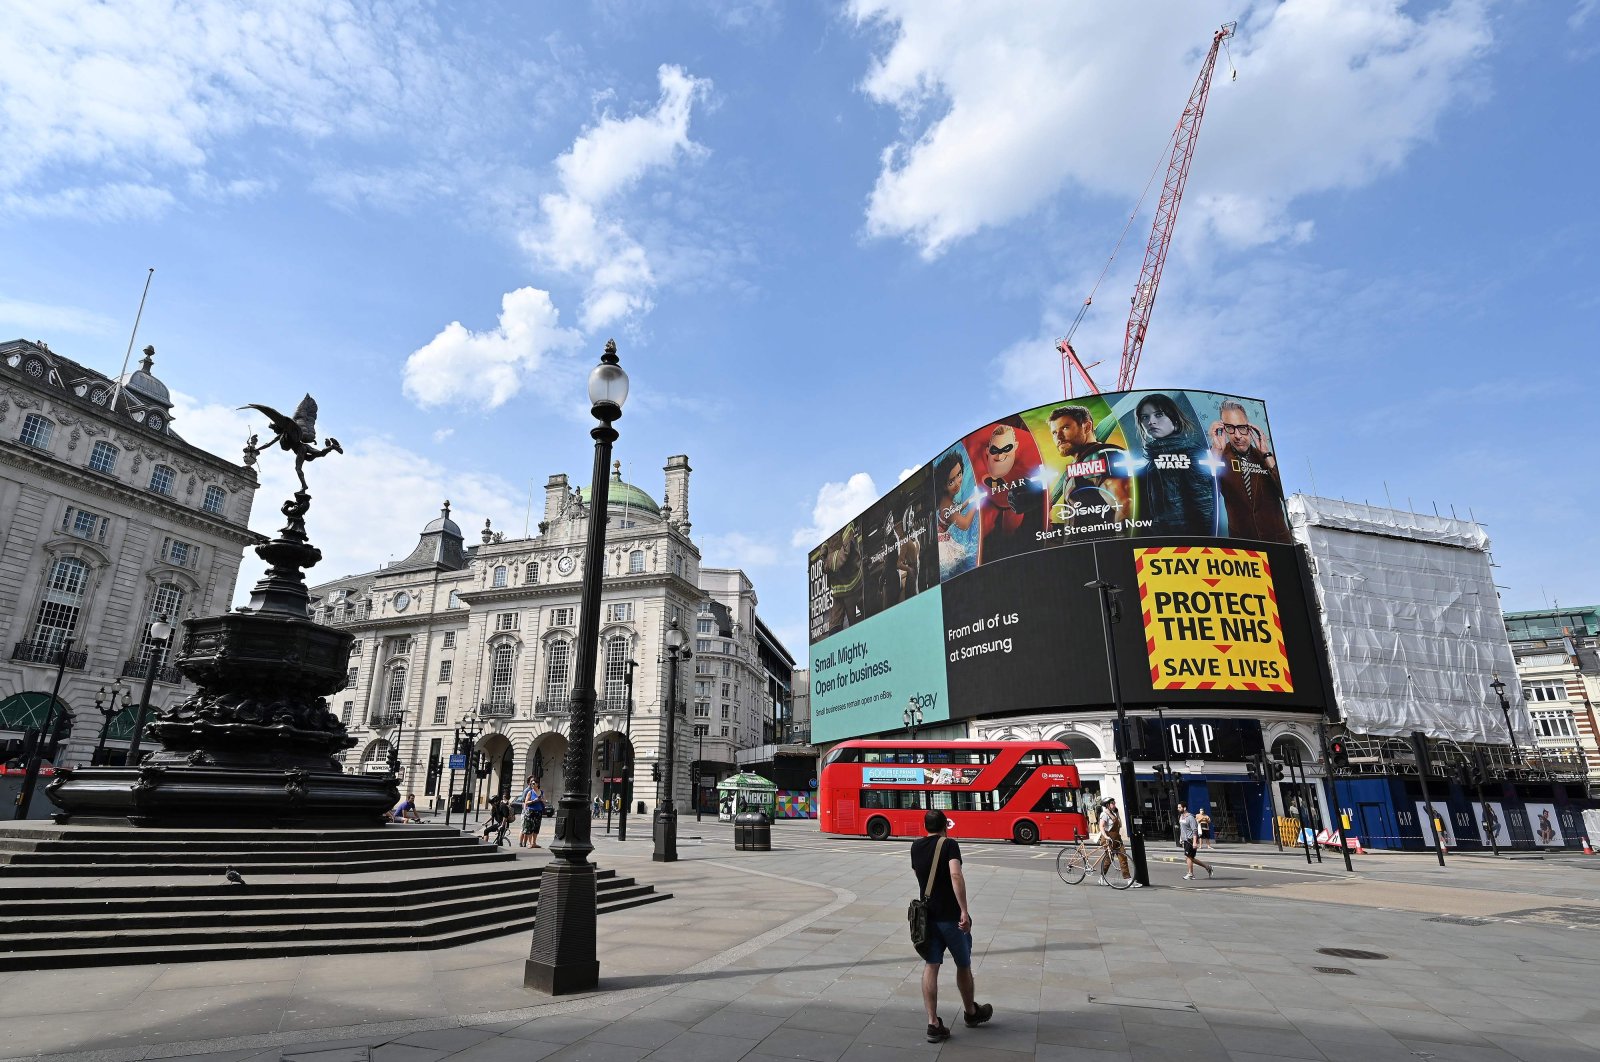 The electronic billboard in Piccadilly Circus displays a notice telling people to "Stay Home. Protect the NHS. Save Lives," beyond an empty Shaftesbury Memorial Fountain in central London, U.K., April 12, 2020. (AFP Photo)